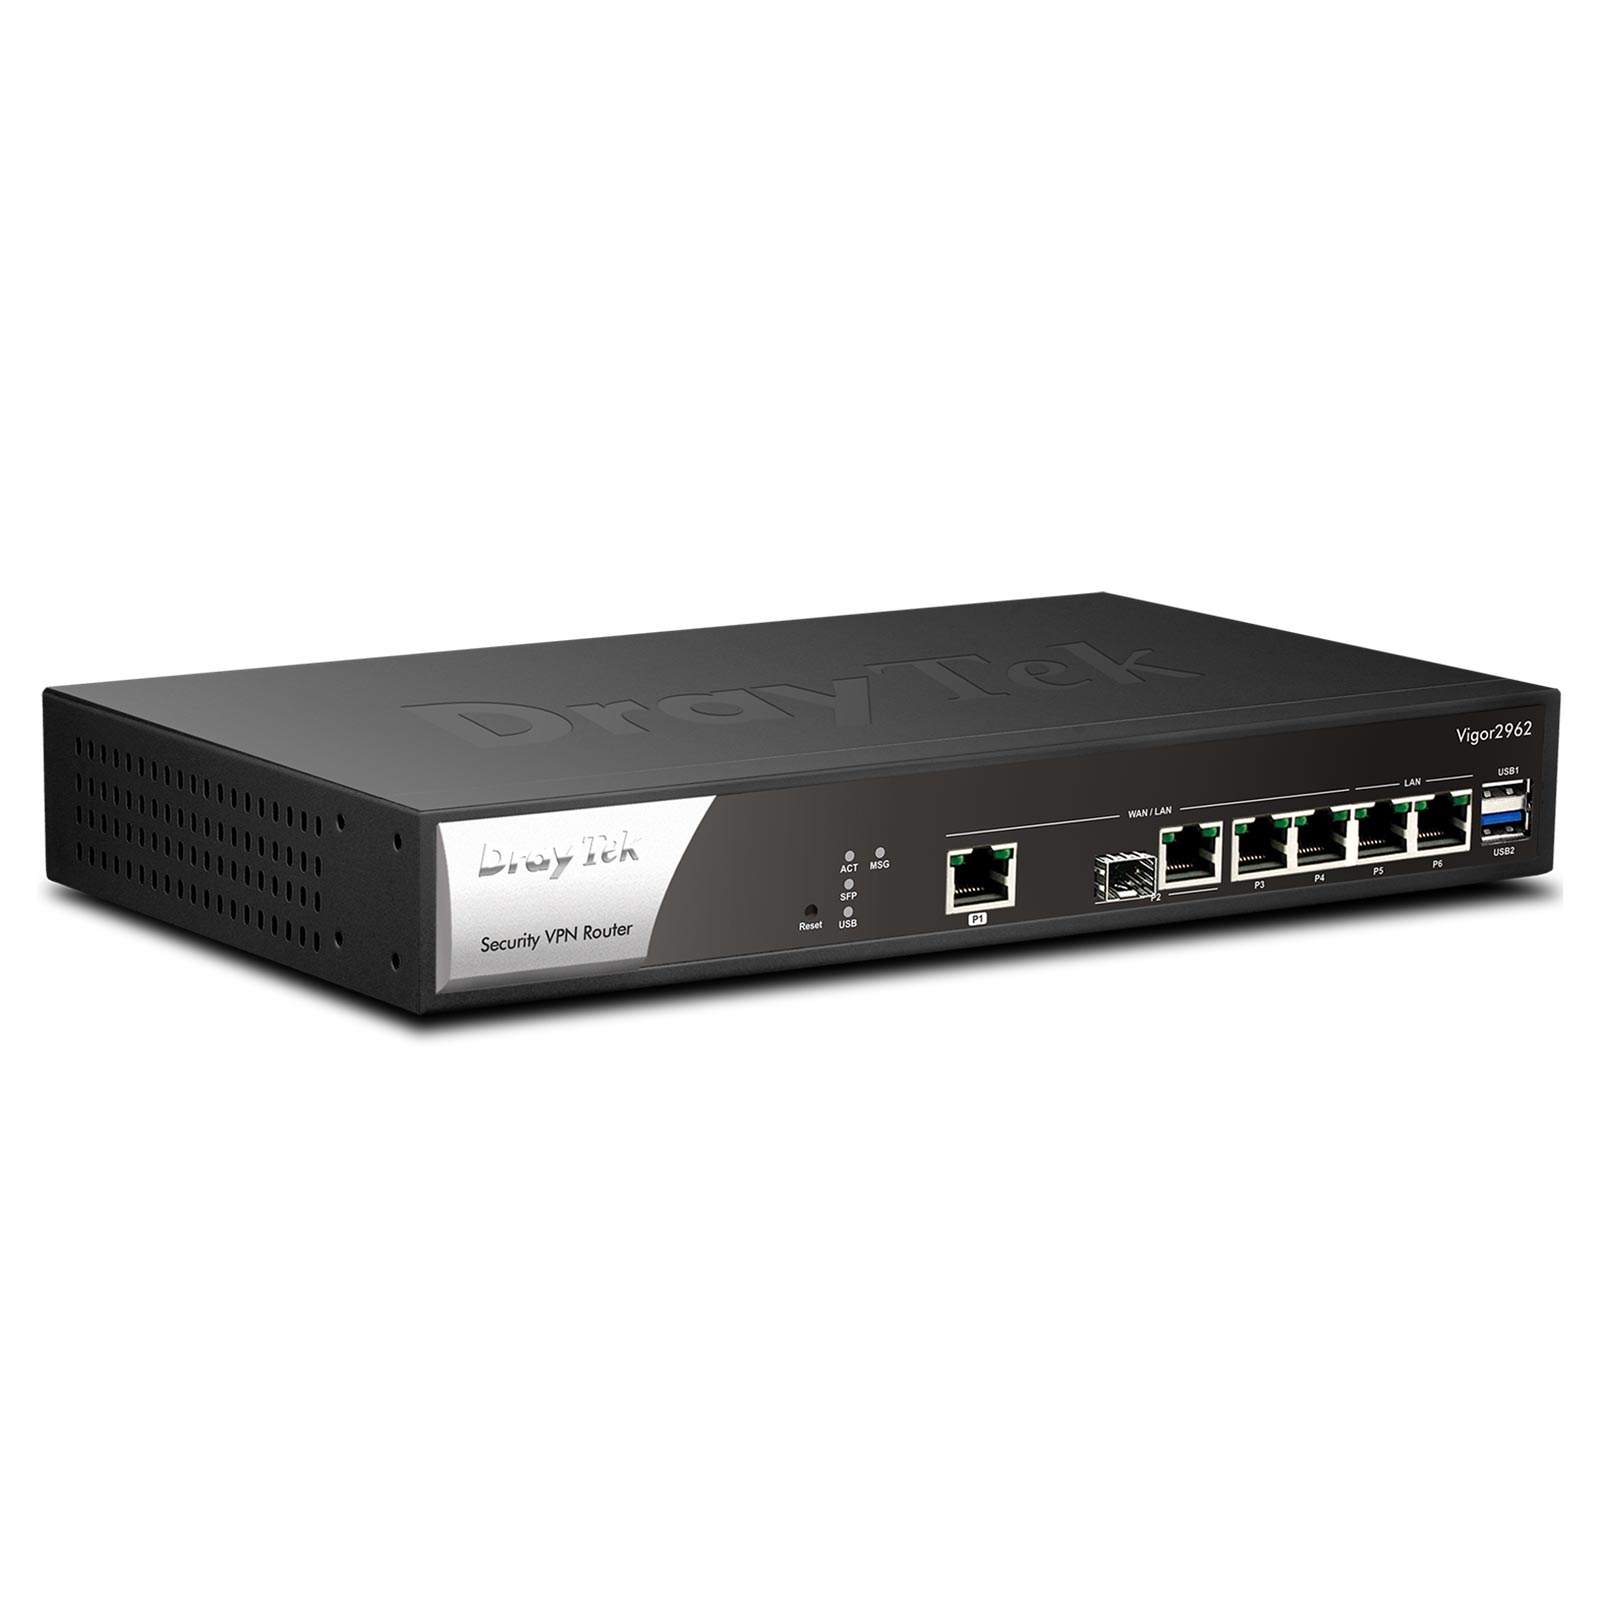 DrayTek Vigor 2962 Dual WAN Gigabit Router (v2962-DE-AT-CH) | Buy for less  with consulting and support